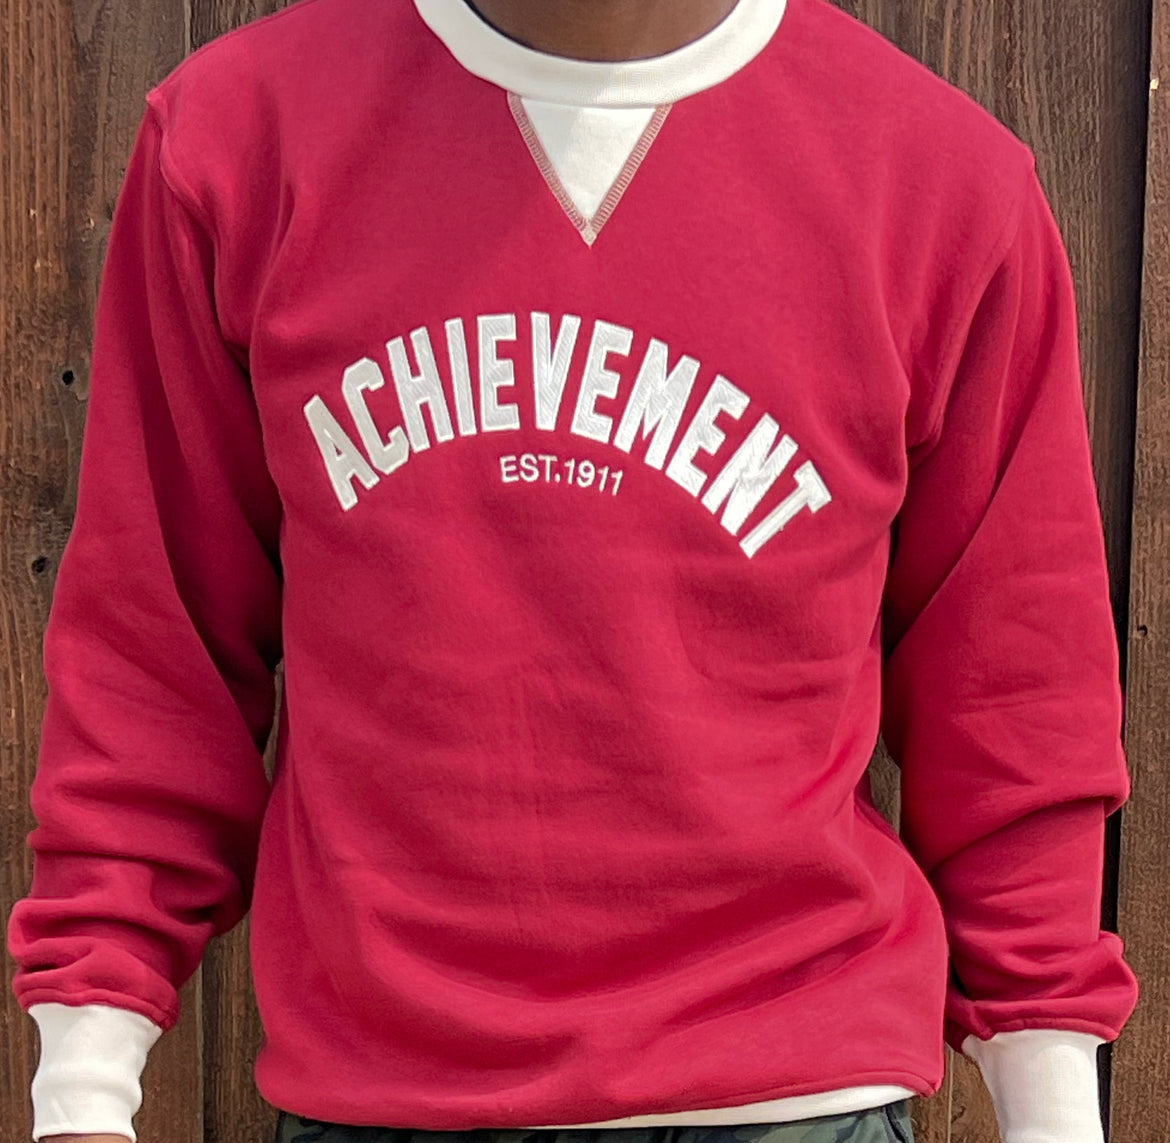 Exclusive Kappa Alpha Psi Single Stitched Appliqué Embroidery Lettered Sweater. This is the perfect long-sleeved Sweater to wear while showing off your Kappa Alpha Psi fraternity lettering. A comfortable 100% cotton tee with a twill  letters embroidery across the chest give you the perfect fit. This sweater is also a perfect gift for your favorite Kappa Man.